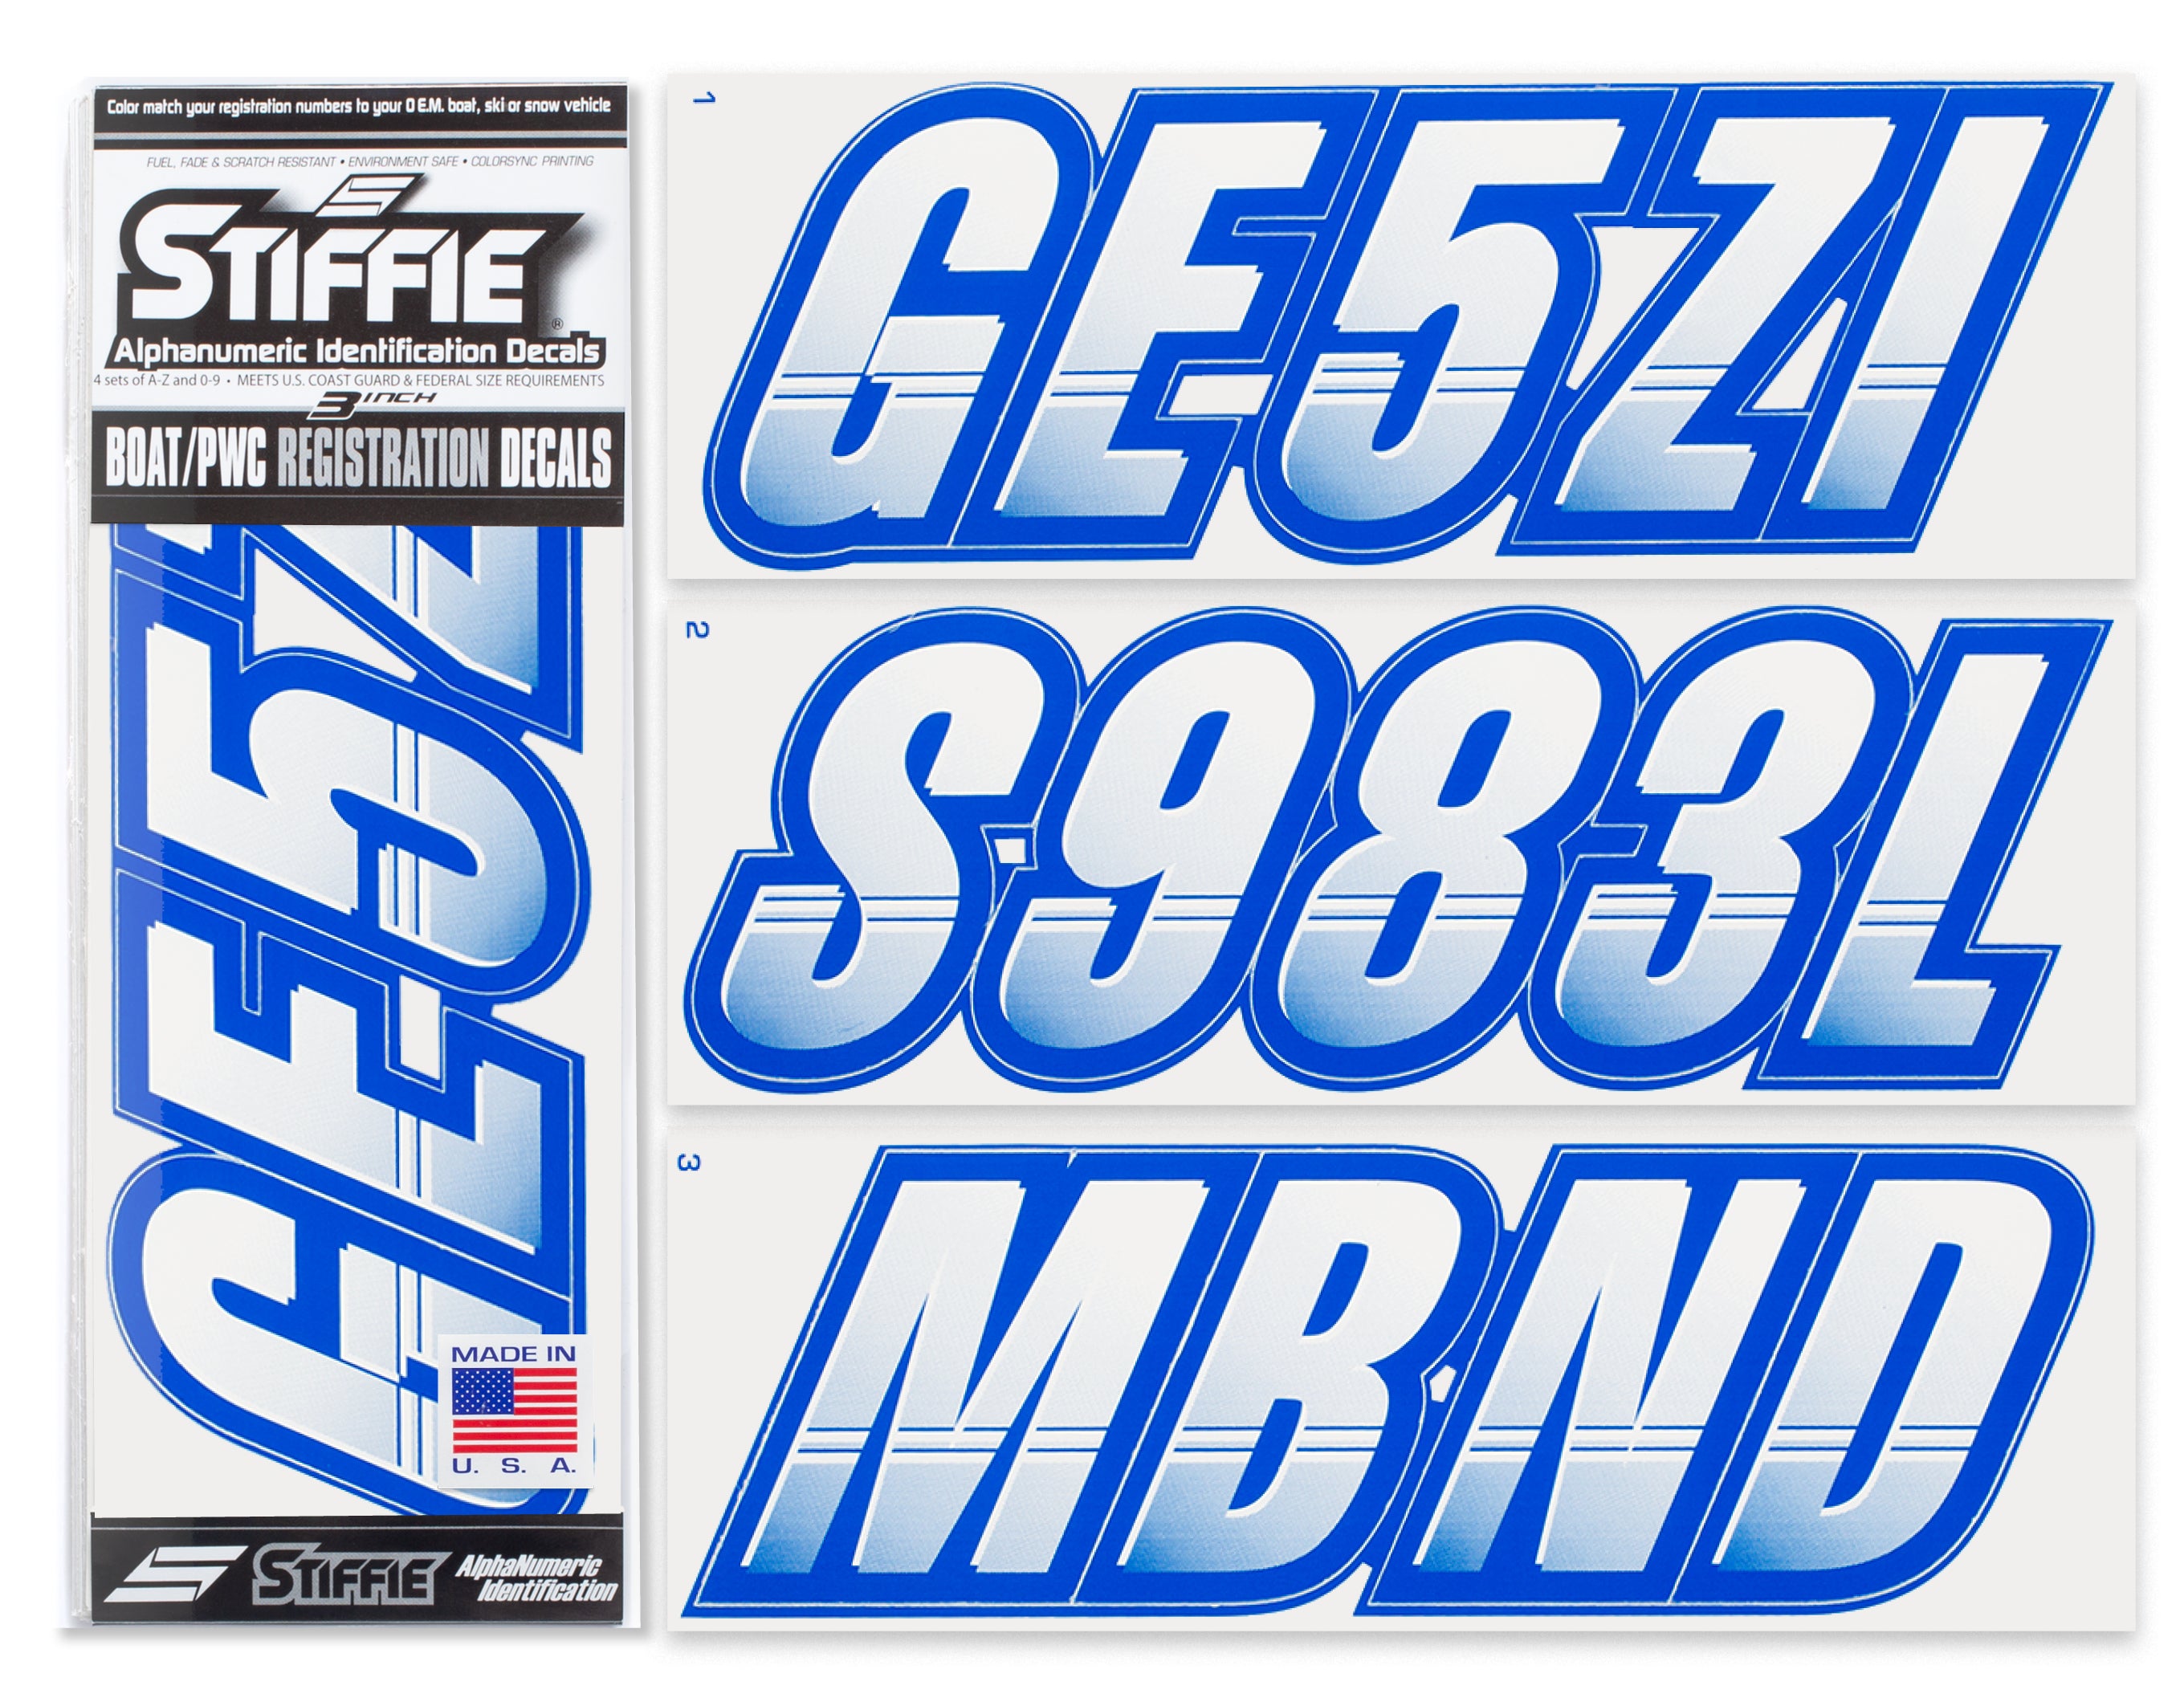 STIFFIE Techtron White/Blue 3" Alpha-Numeric Registration Identification Numbers Stickers Decals for Boats & Personal Watercraft